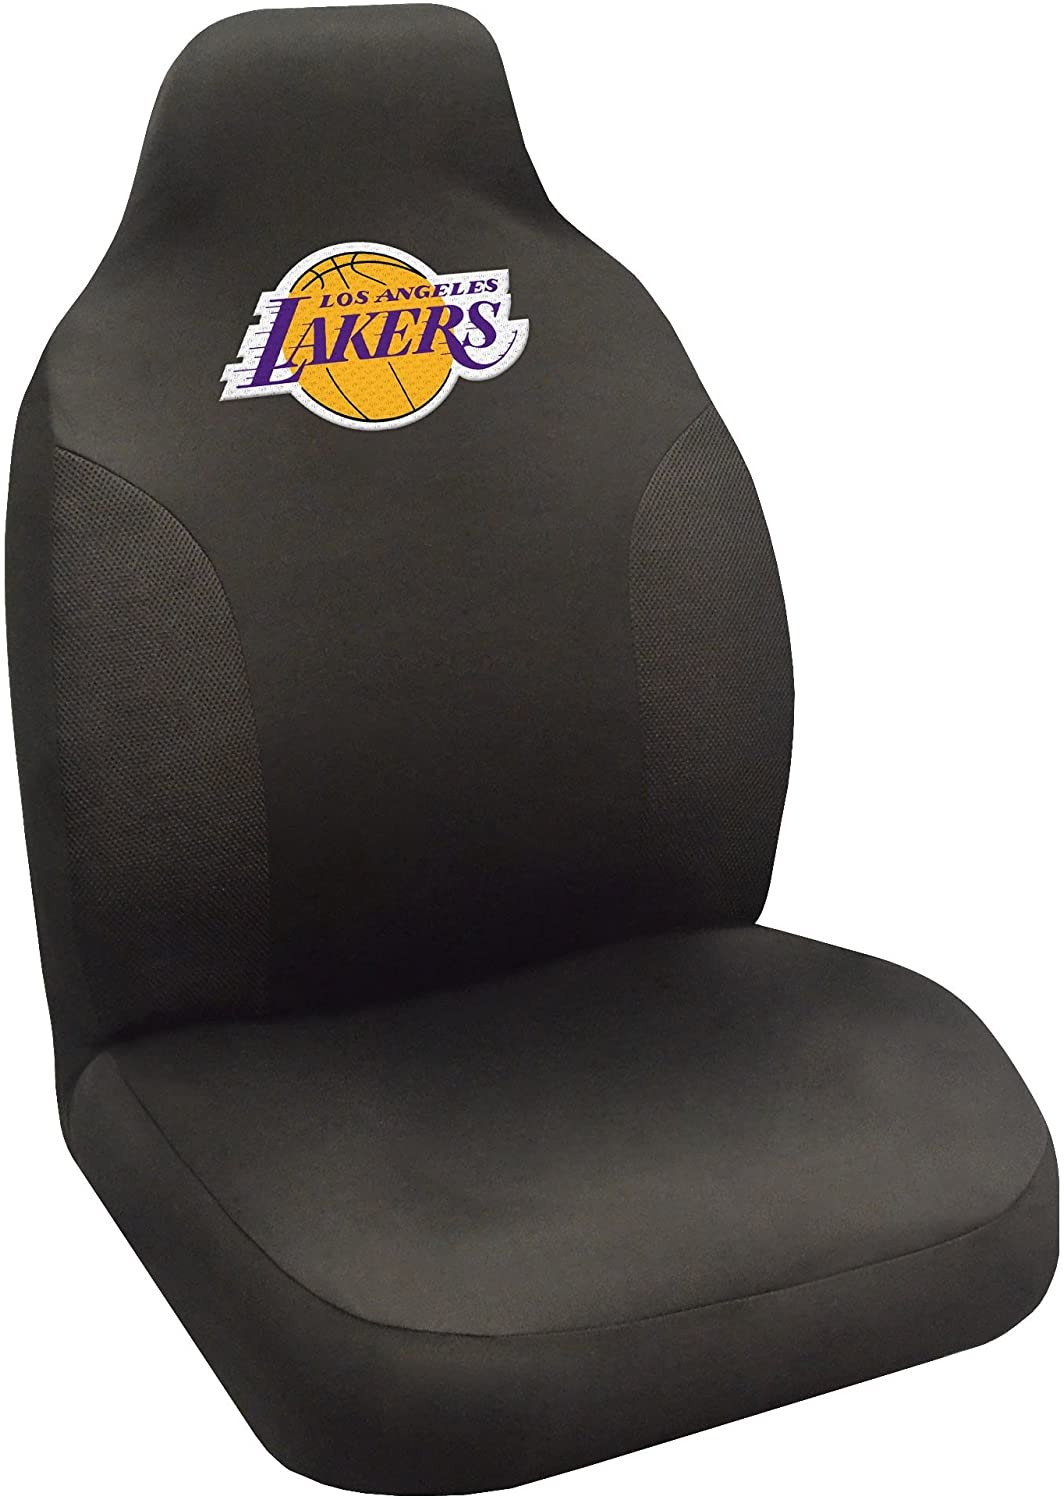 FANMATS 14967 NBA Los Angeles Lakers Polyester Seat Cover,20"x48"